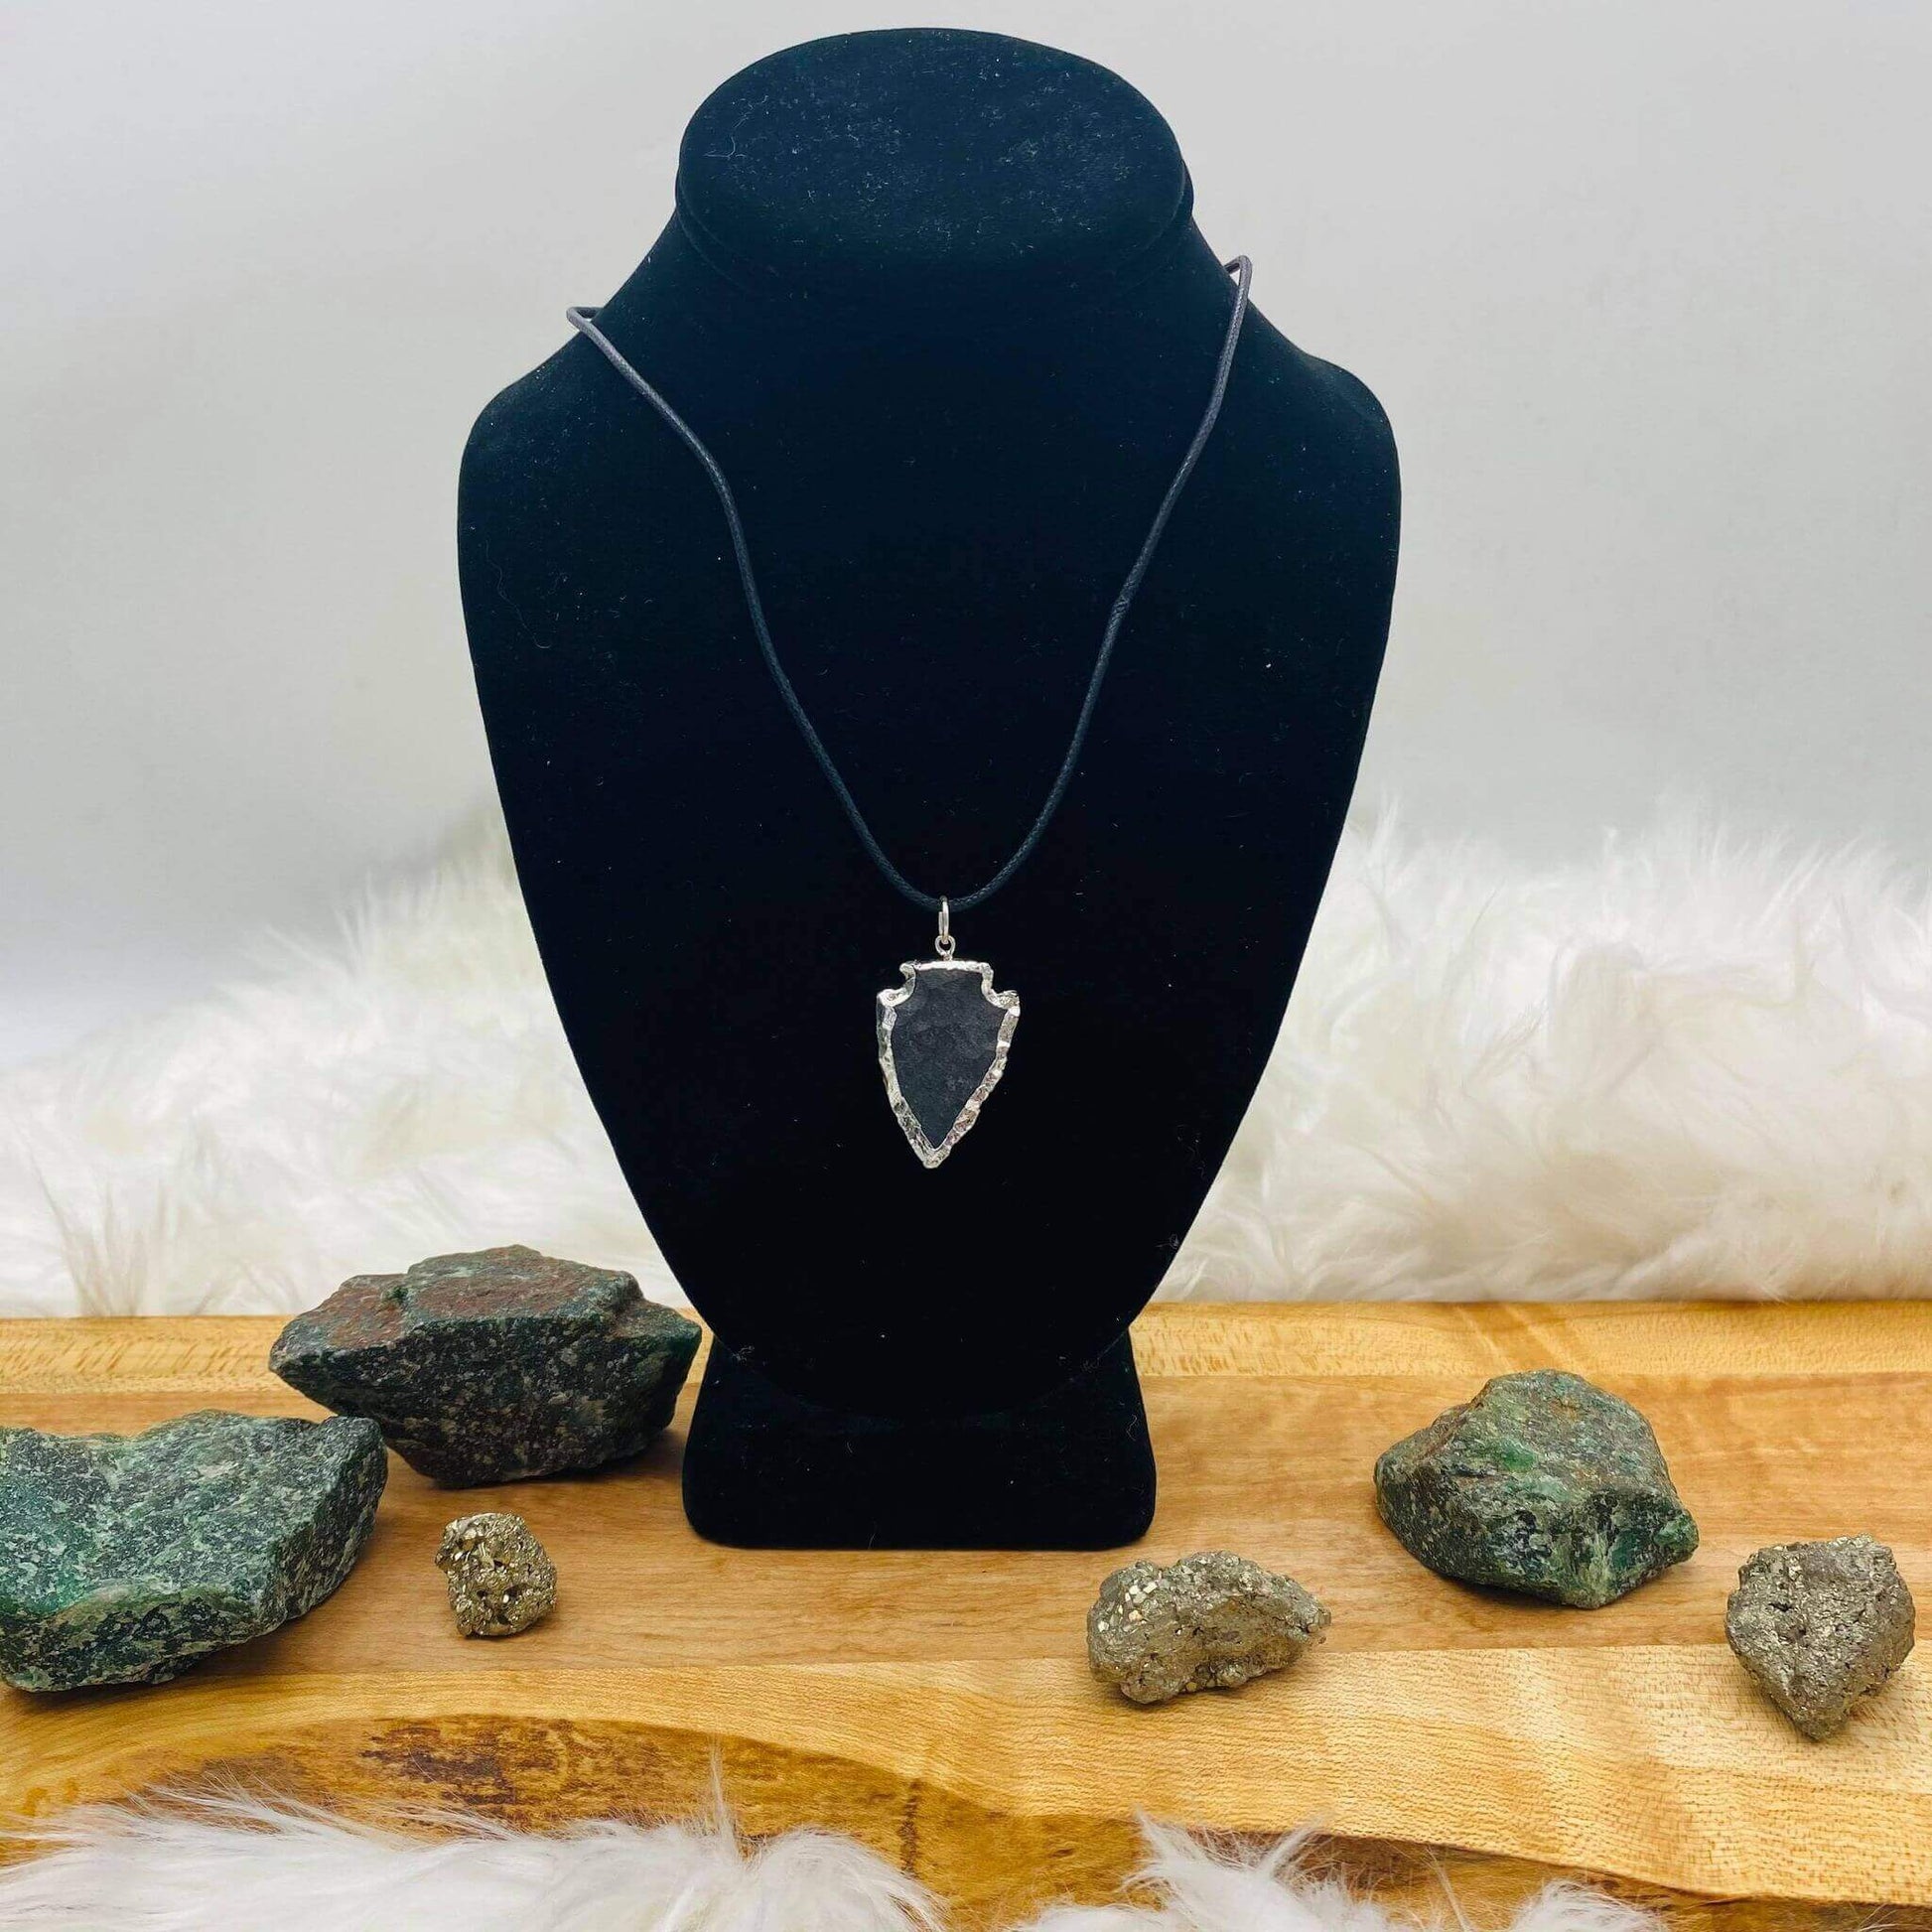 Black Obsidian Arrowhead Necklace at $25 only from Spiral Rain